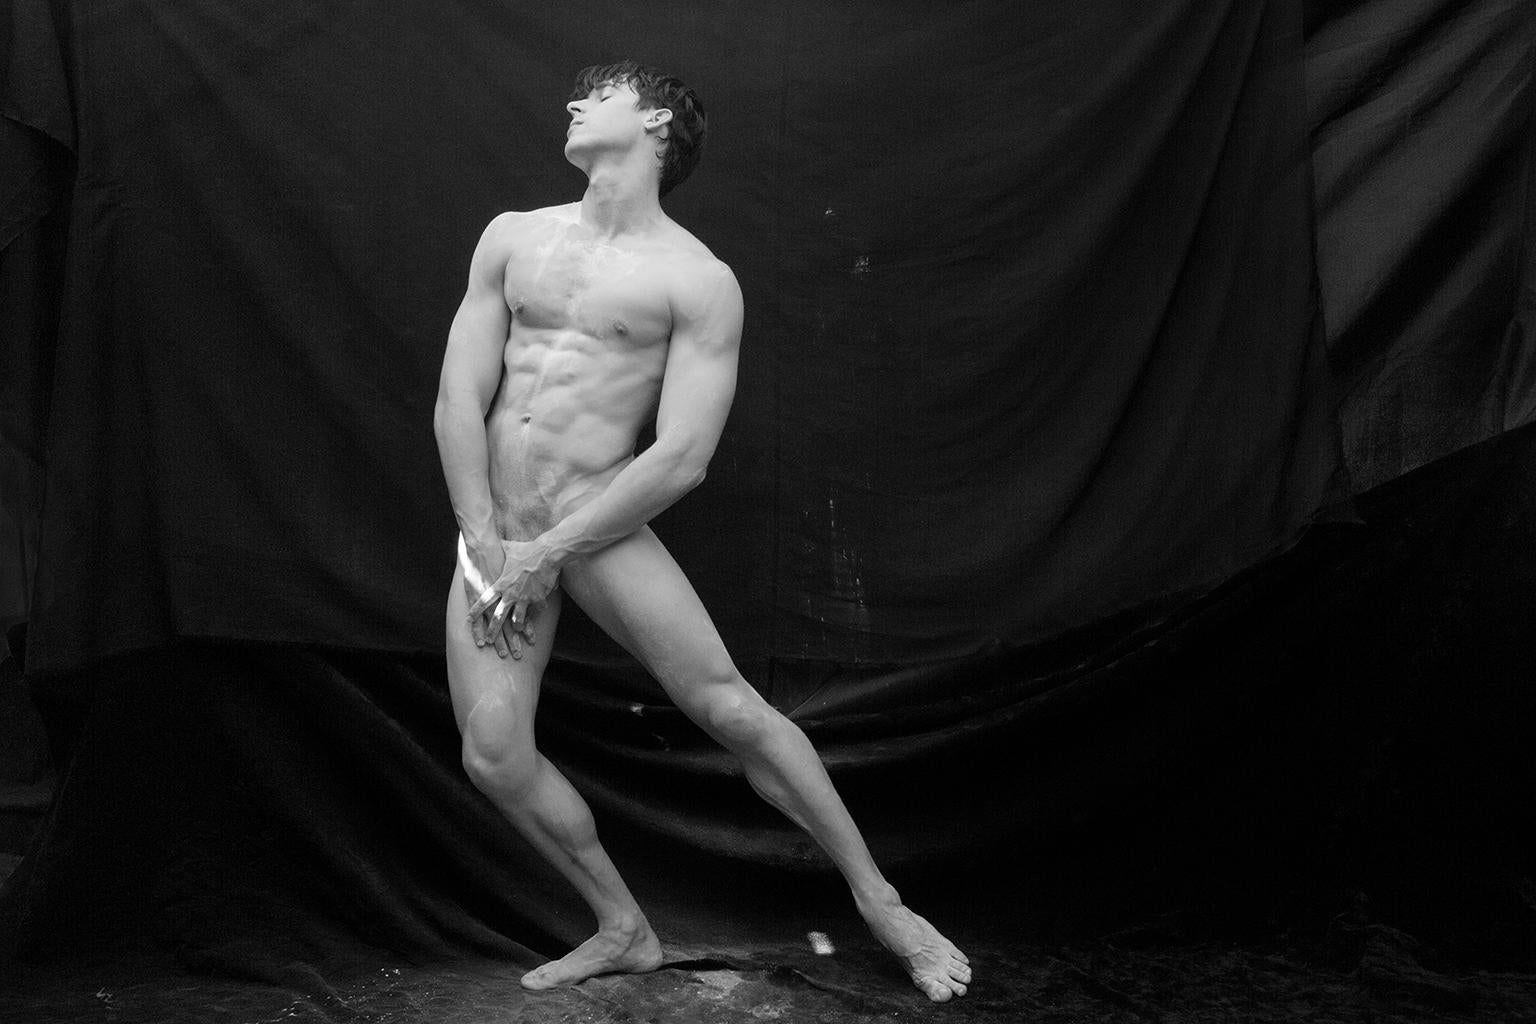 Ricky Cohete Black and White Photograph - Untitled, From the series Acto Uno. Male Nude Limited Edition B&W Photograph